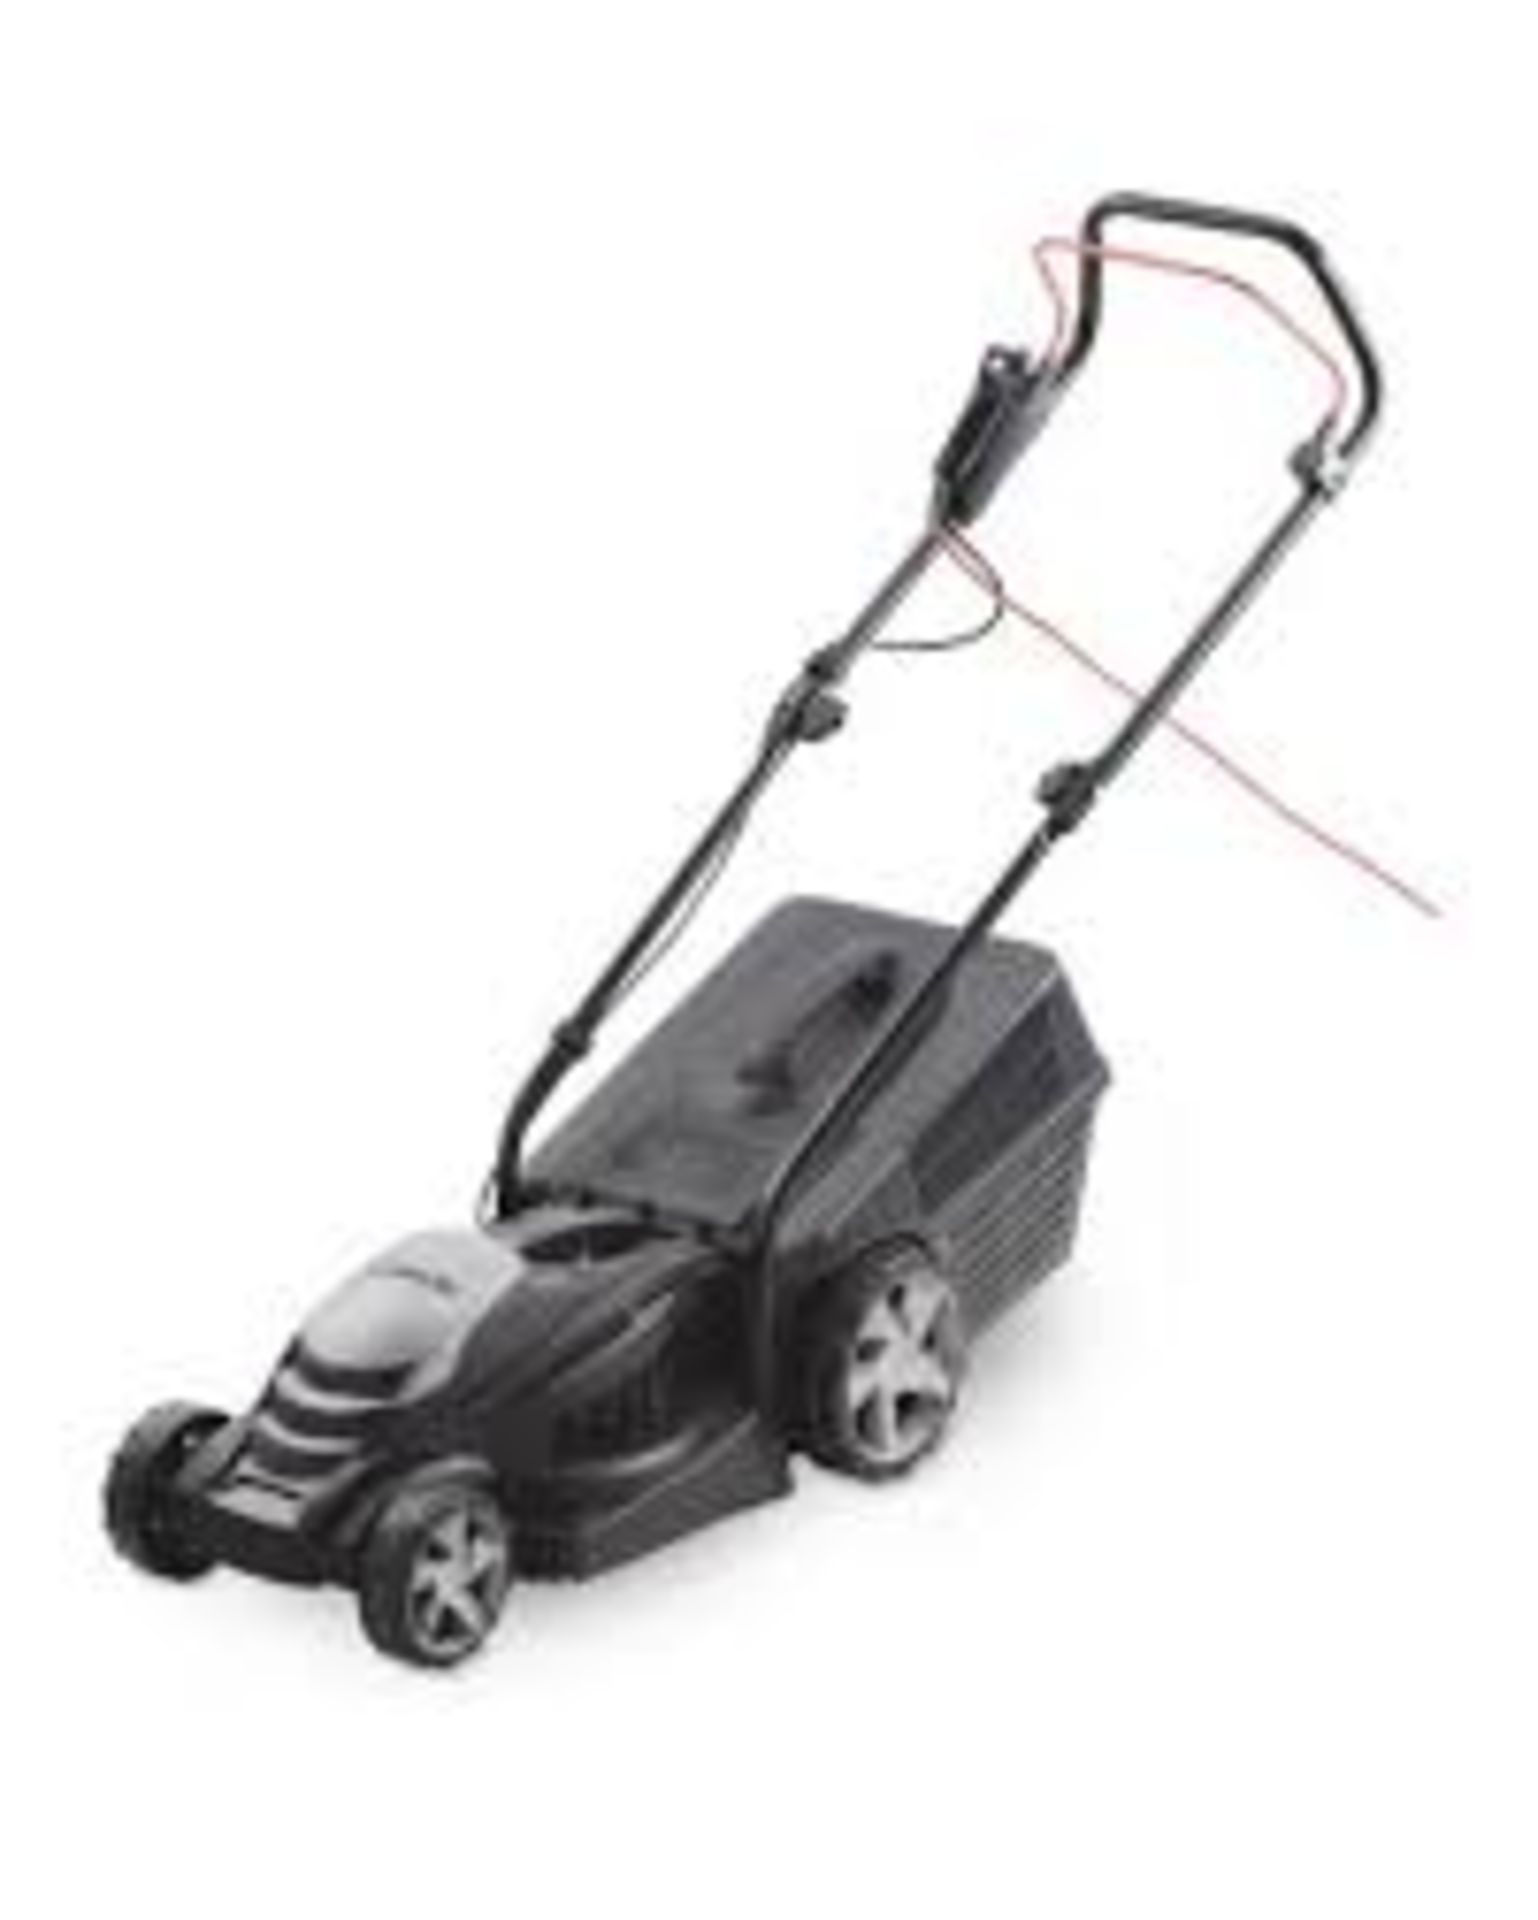 Boxed Gardenline Electric Plug In Lawn Mower RRP £75 (Public Viewing and Appraisals Available)